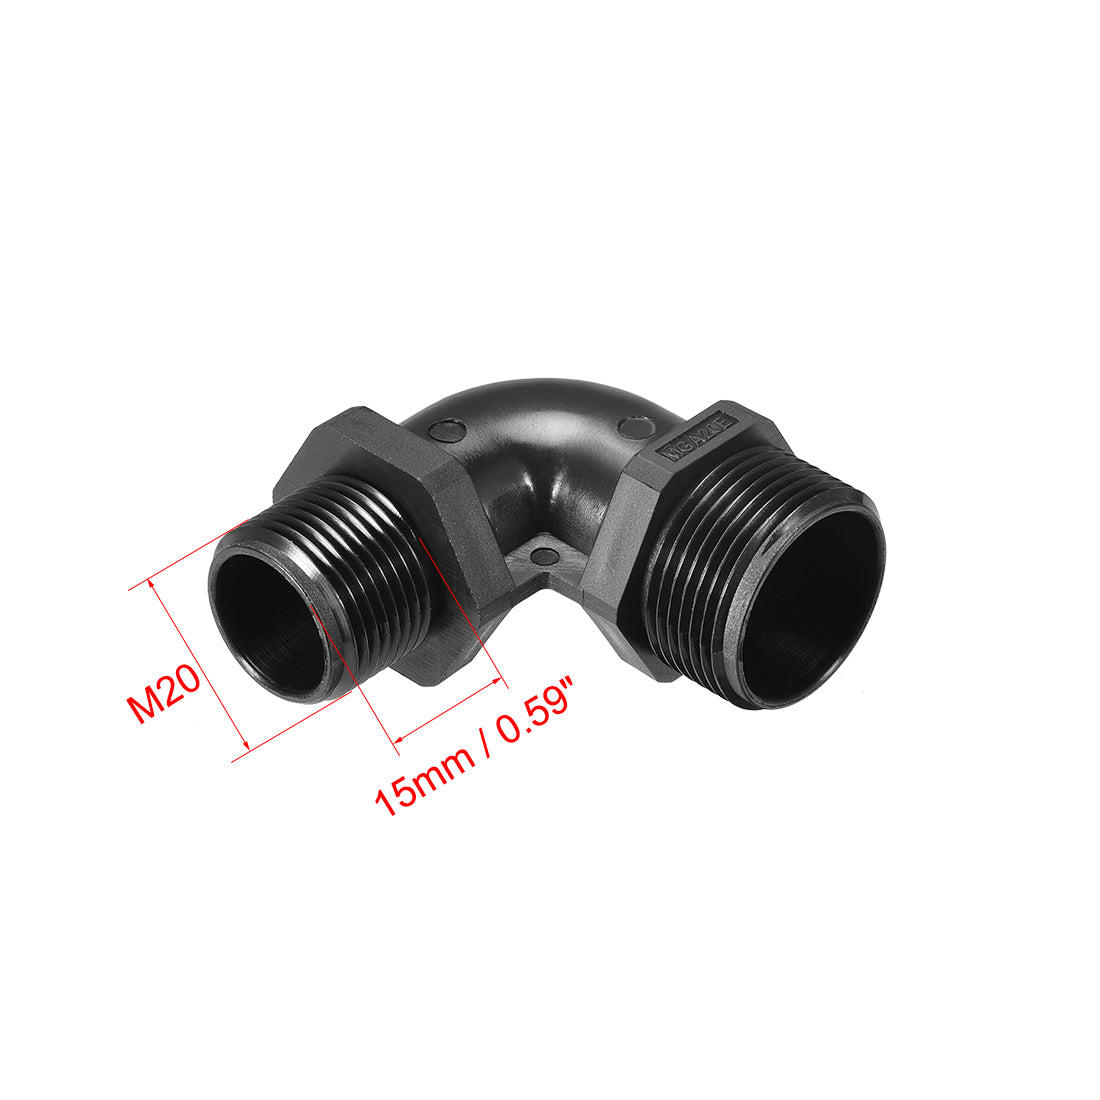 Uxcell Uxcell M20 Cable Gland 90 Degree 4 Holes Waterproof IP68 Nylon Joint Adjustable Locknut with Strain Relief for 3-5mm Dia Wire